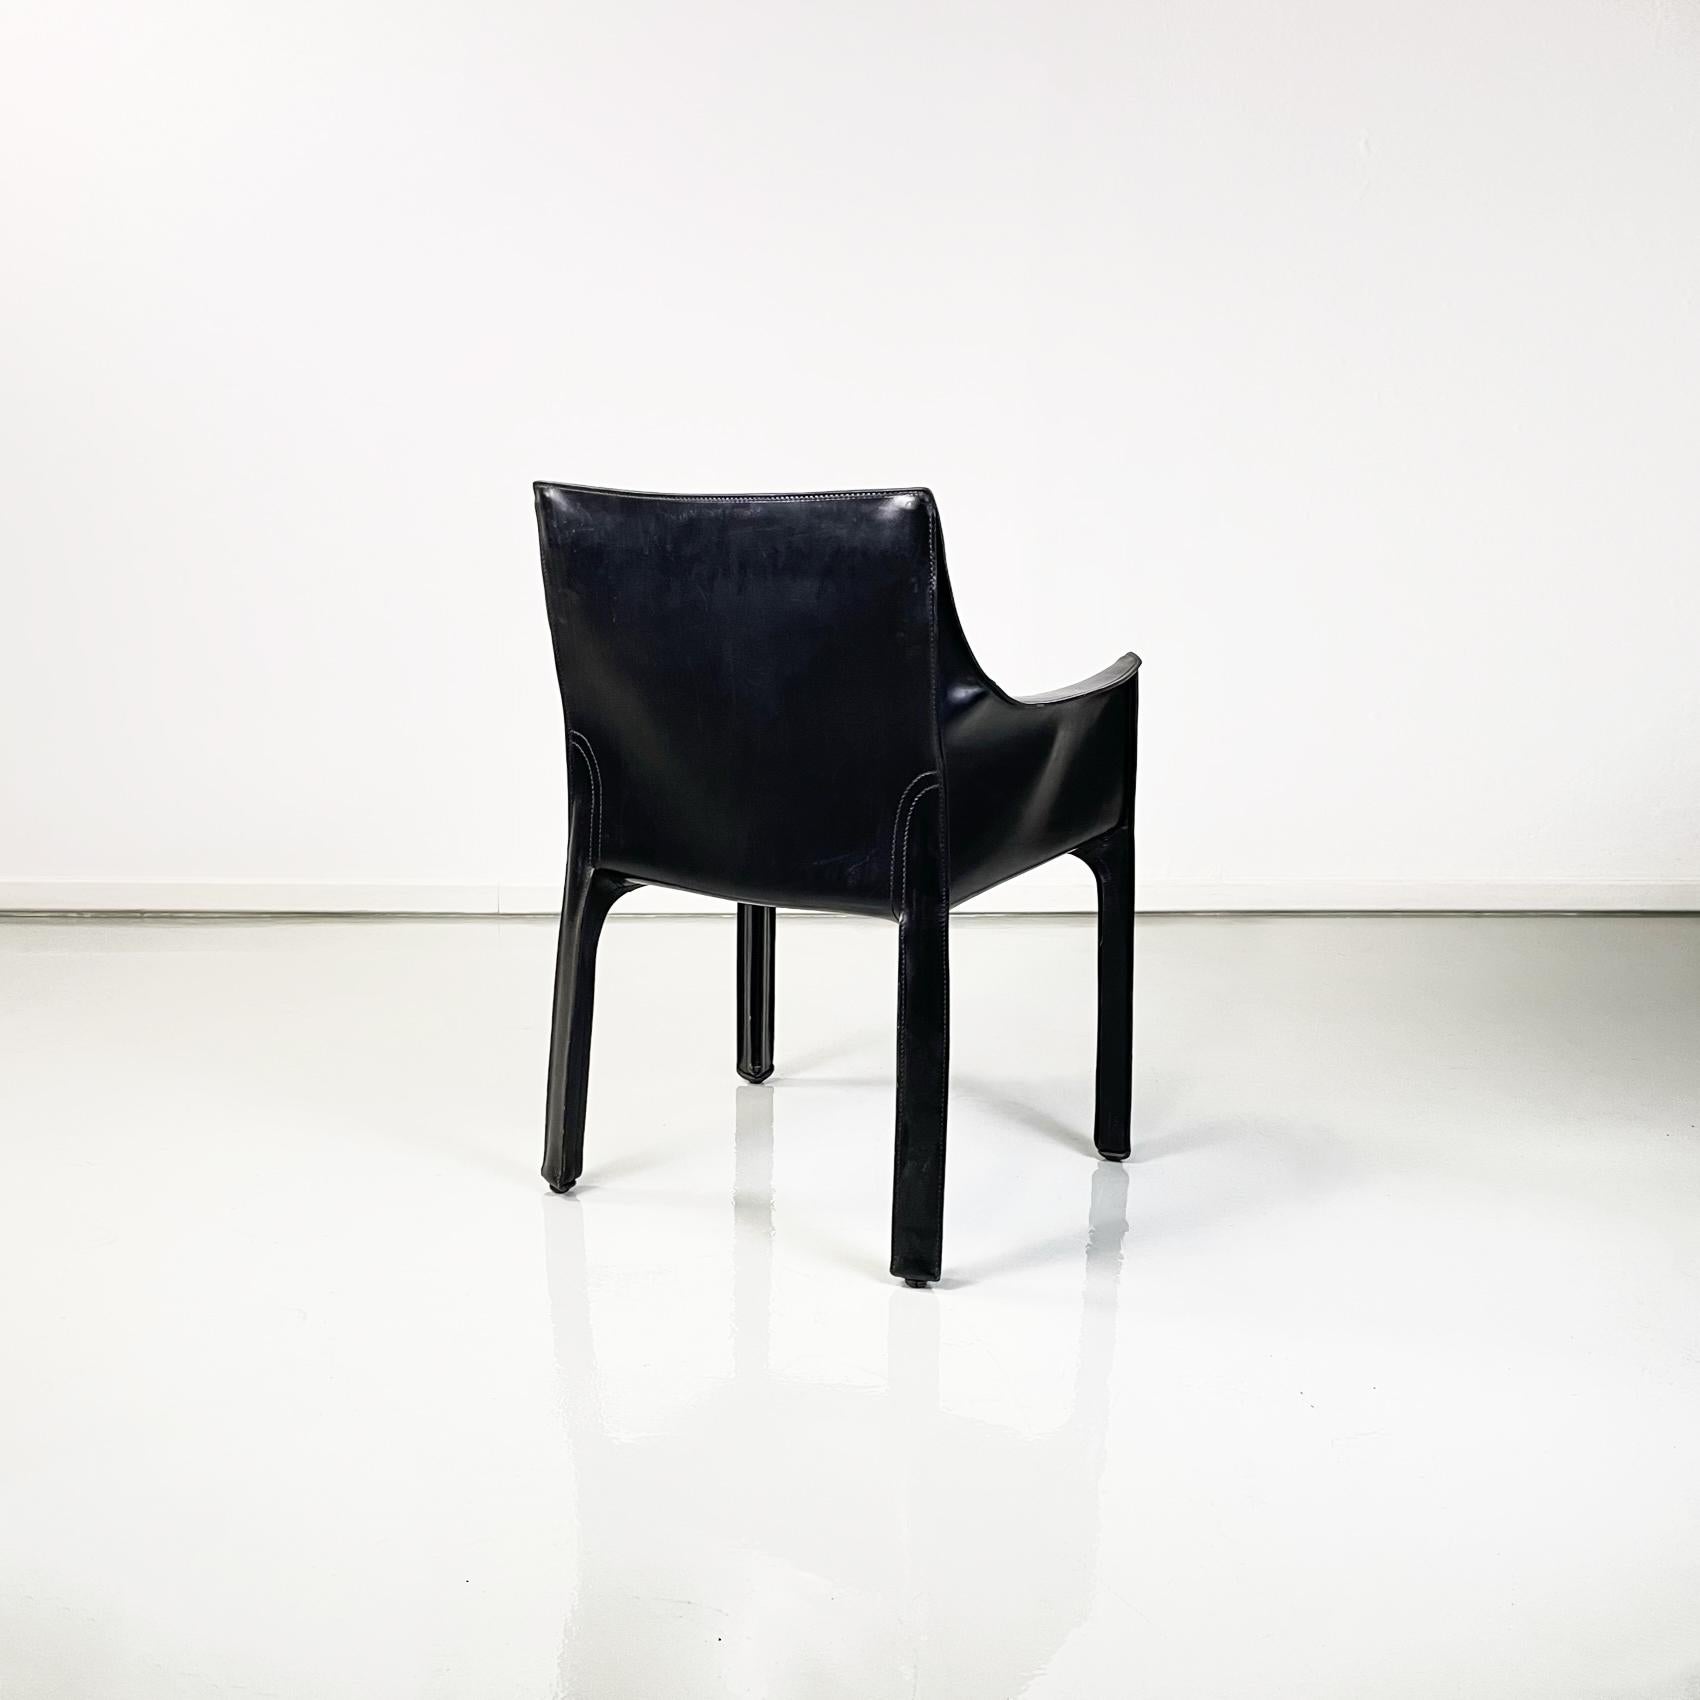 Late 20th Century Italian Modern Leather Armchair Mod Cab 414 by Mario Bellini for Cassina, 1980s